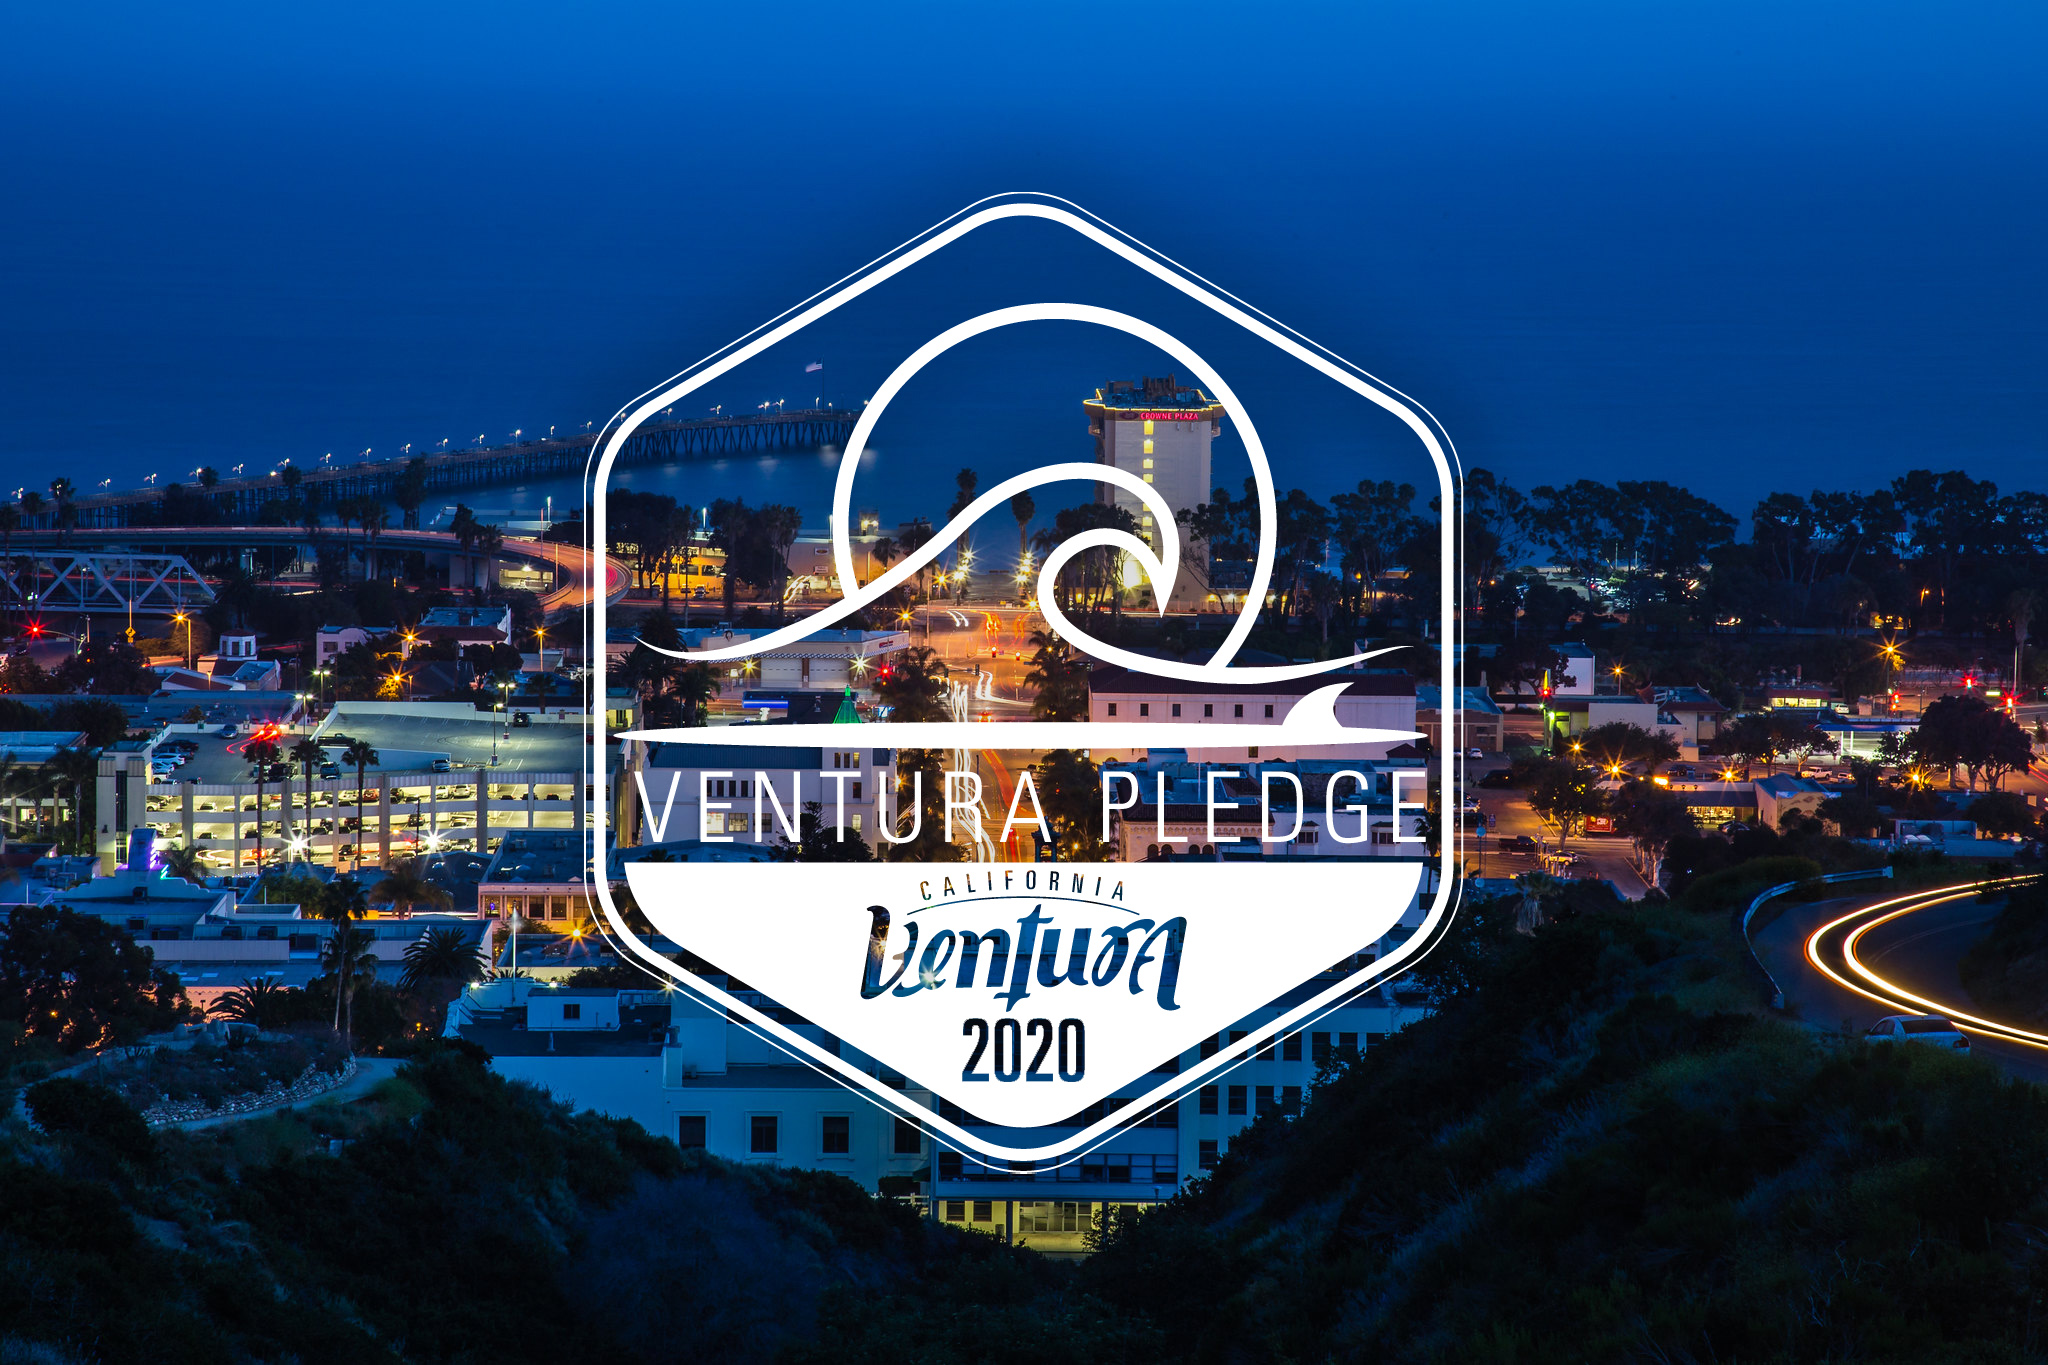 I pledge to be Kind, to Support Local, and to do the Next Right Thing for Ventura...